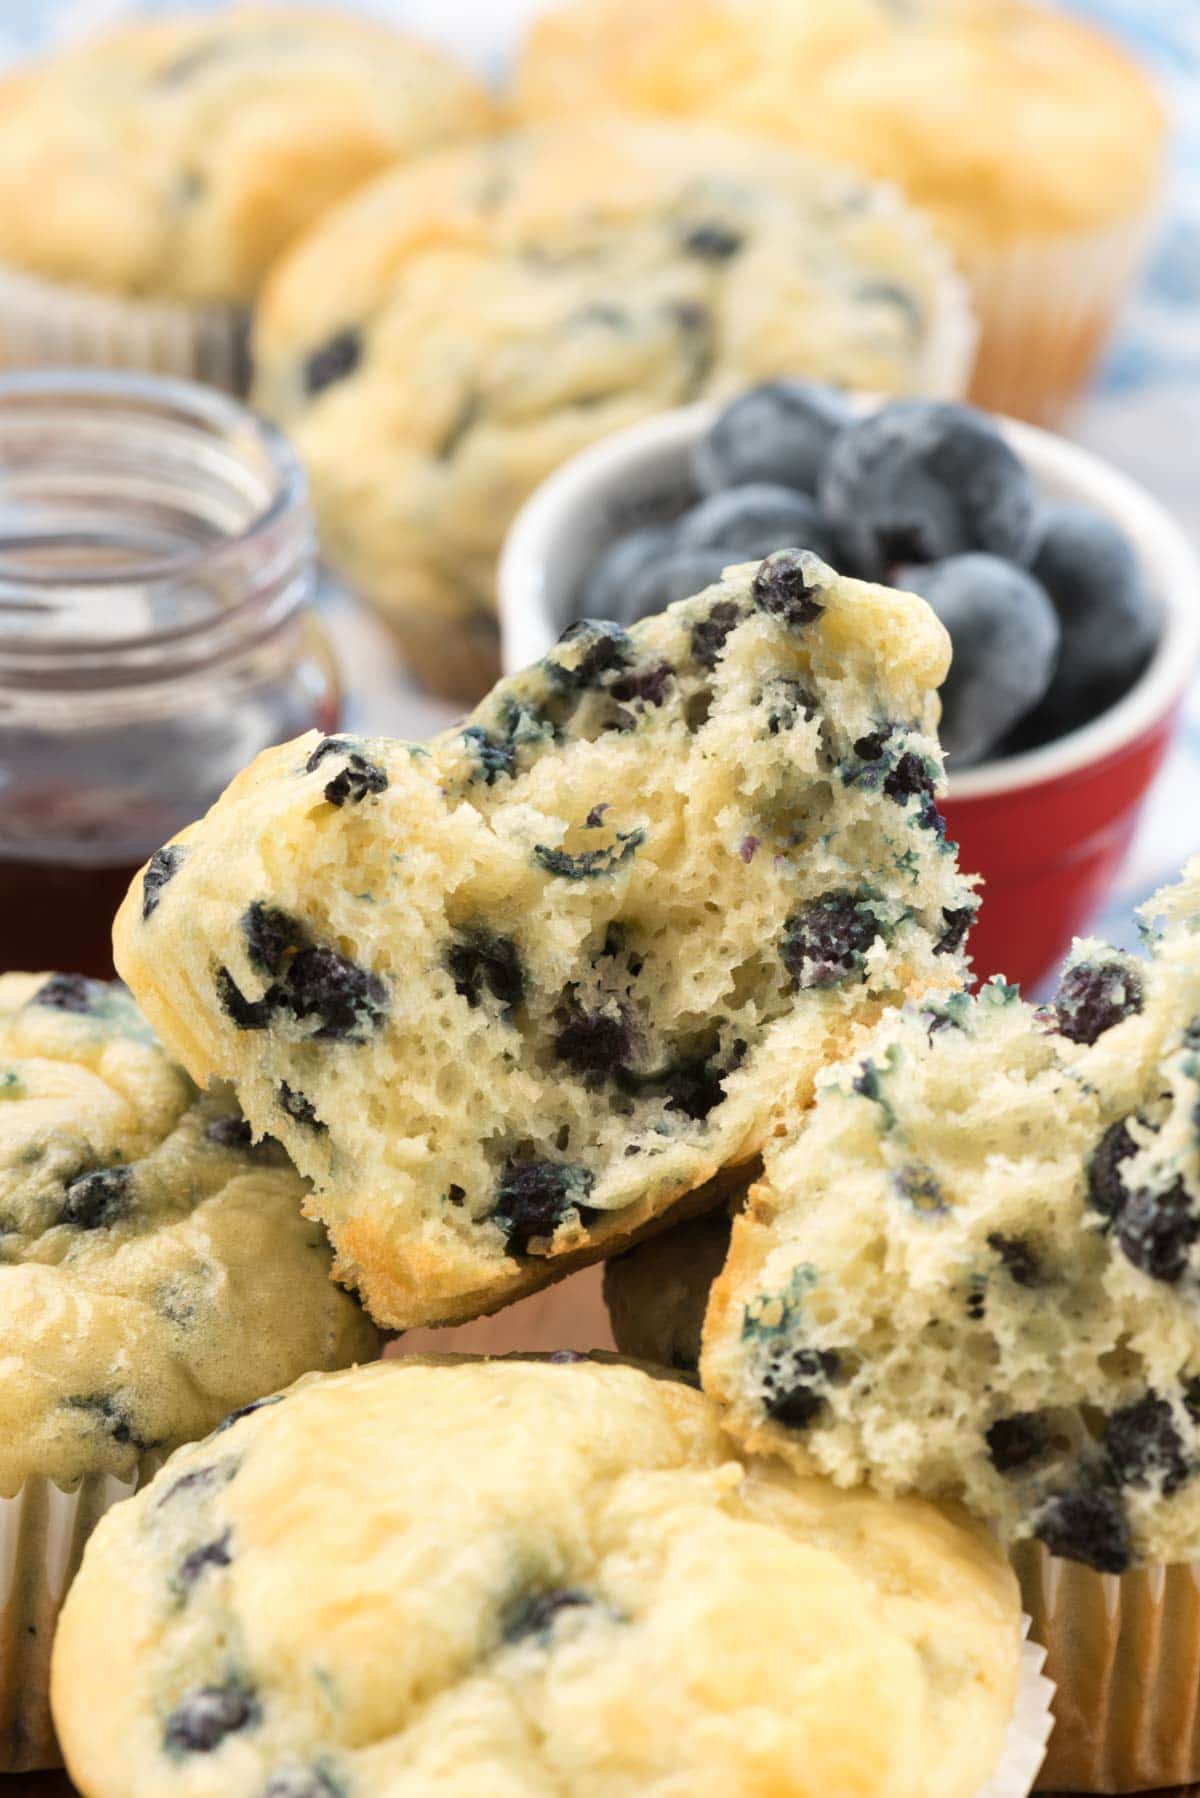 Blueberry Pancake Muffins - these easy muffins are made with pancake batter. They're great for on the go or with syrup for an easy make-ahead breakfast!